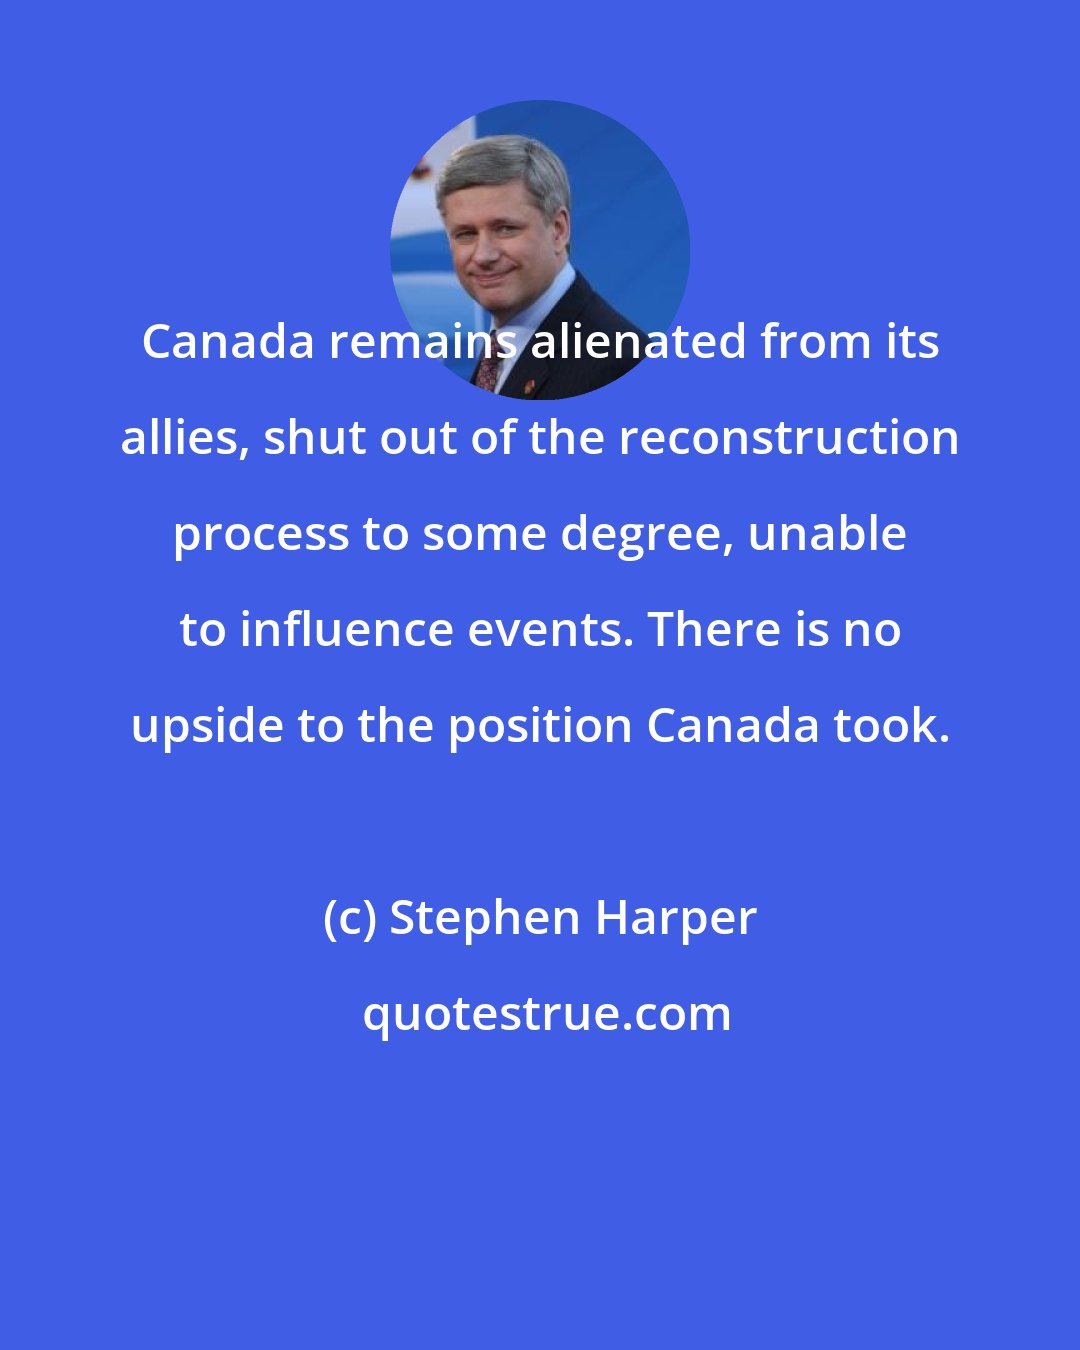 Stephen Harper: Canada remains alienated from its allies, shut out of the reconstruction process to some degree, unable to influence events. There is no upside to the position Canada took.